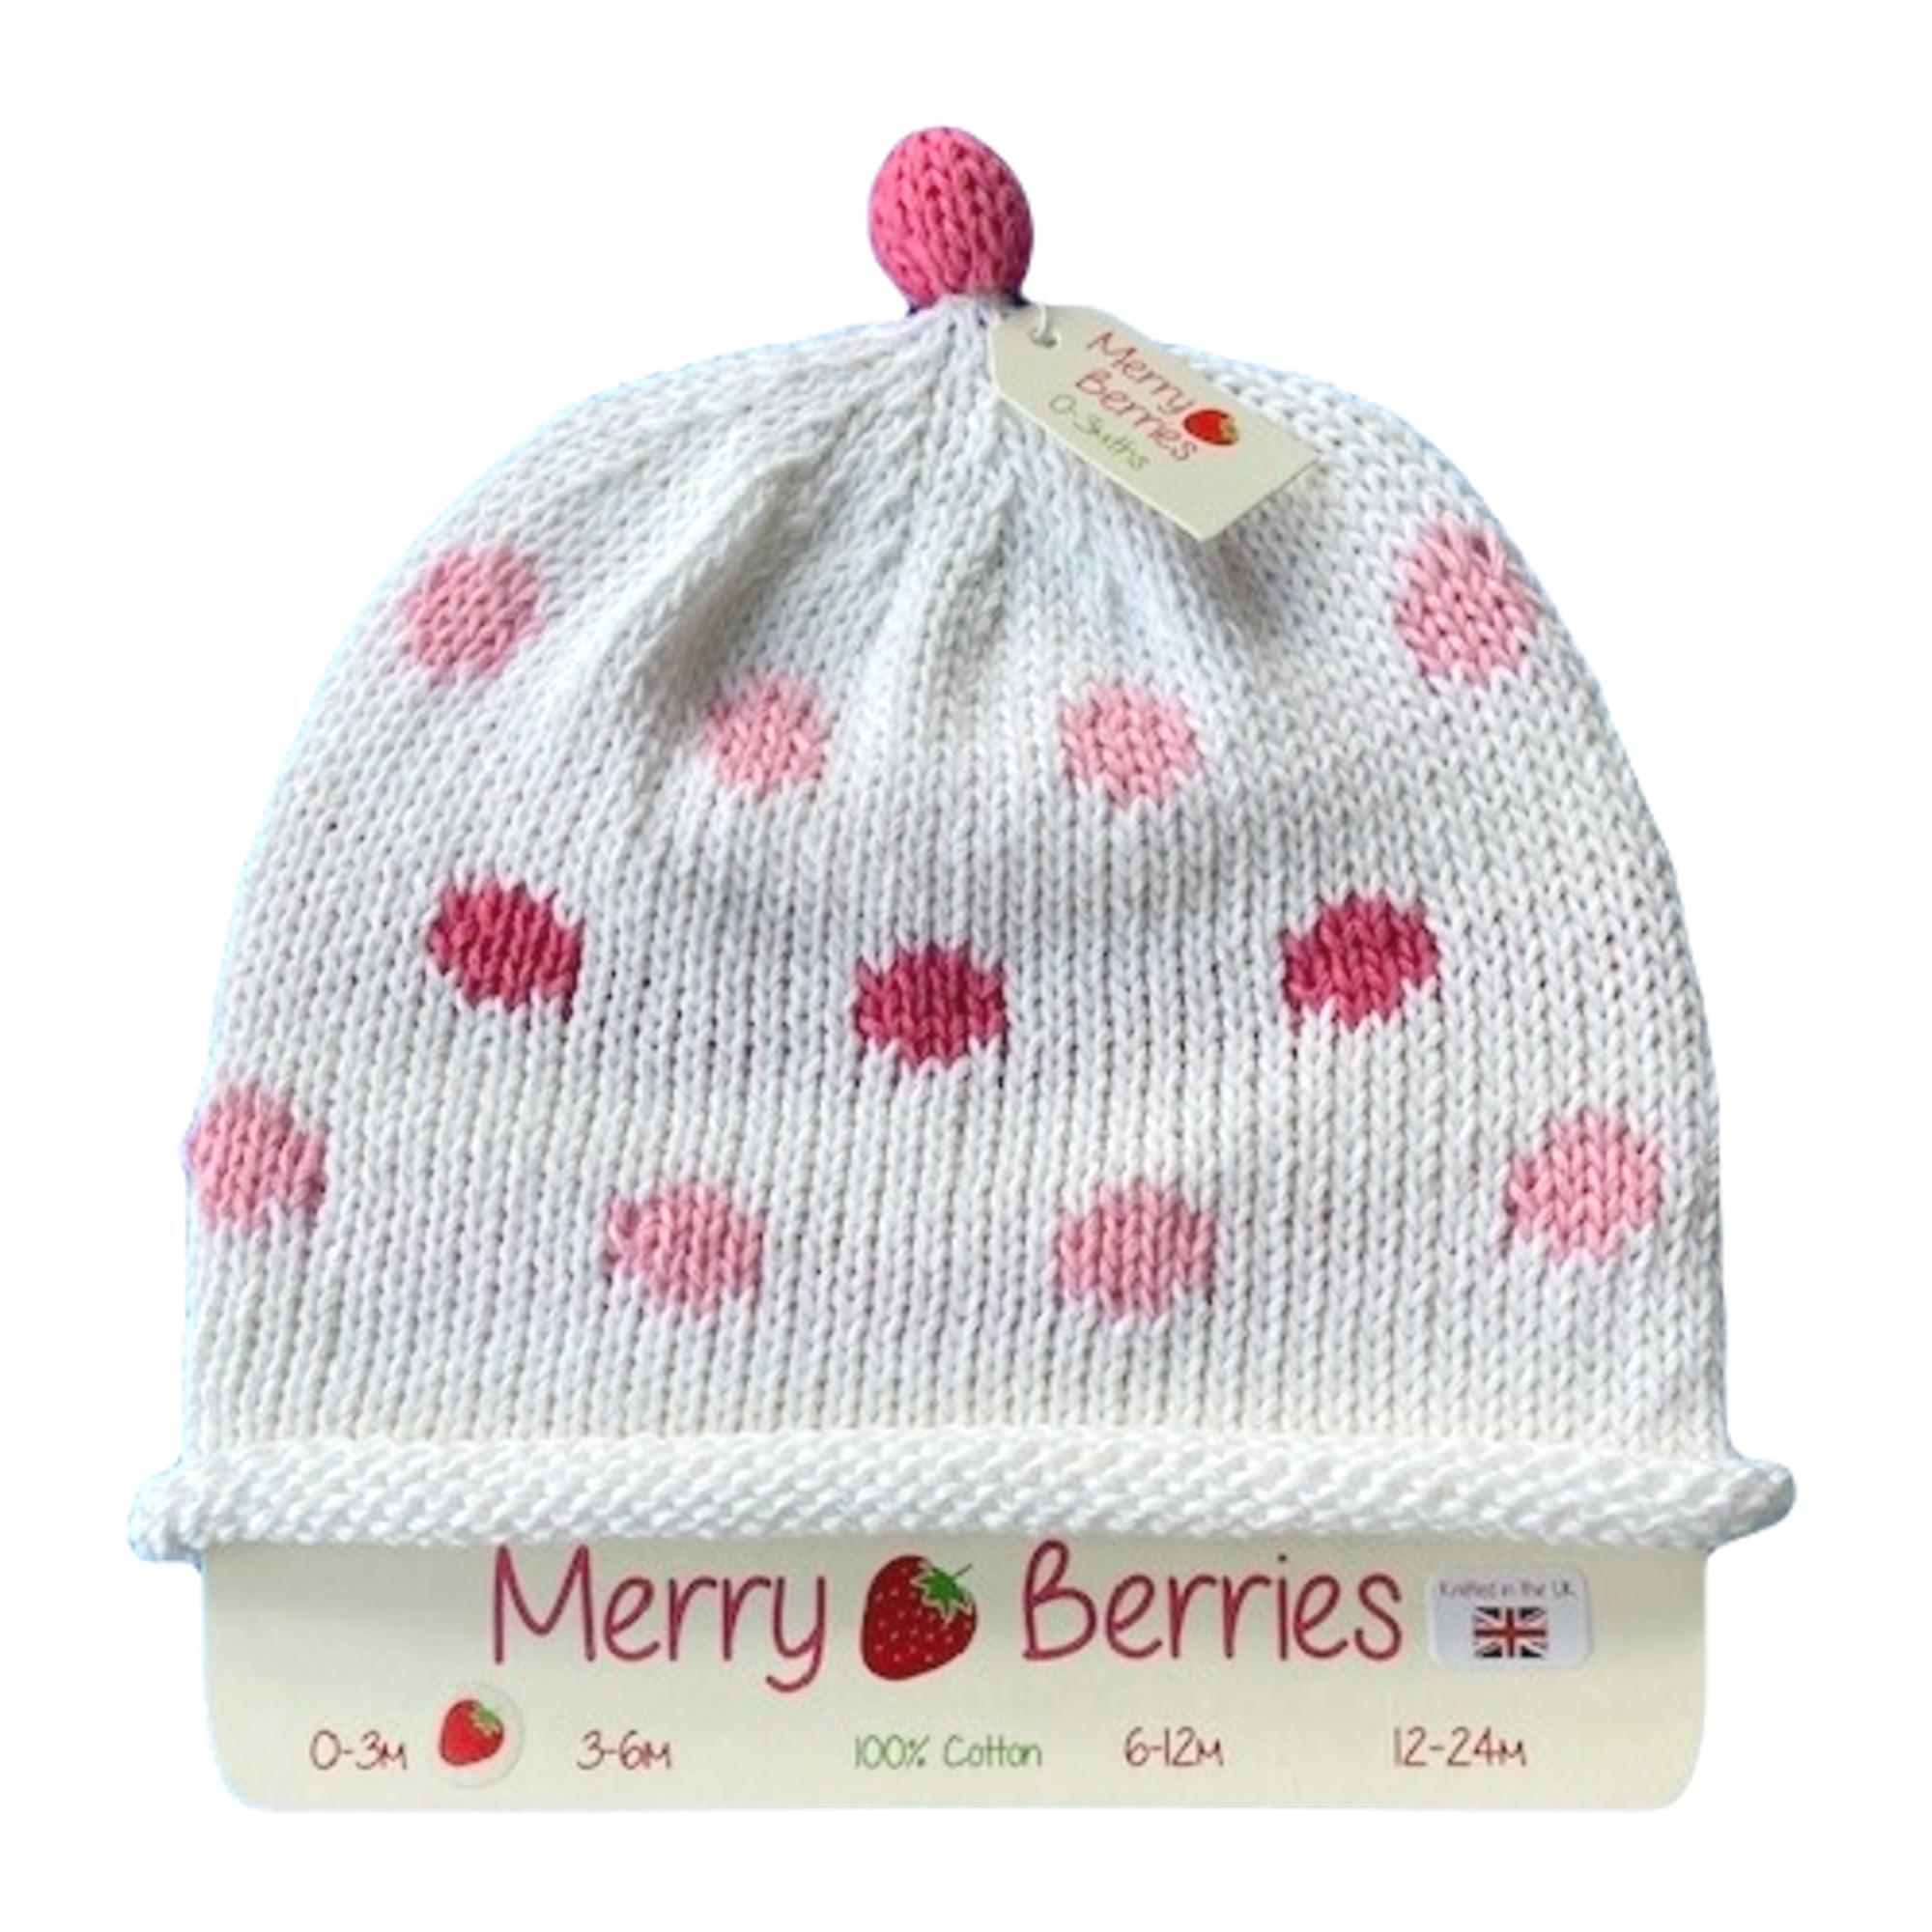 Merry Berries - Candyspot Knitted baby Hat-0-24mths-Cotton